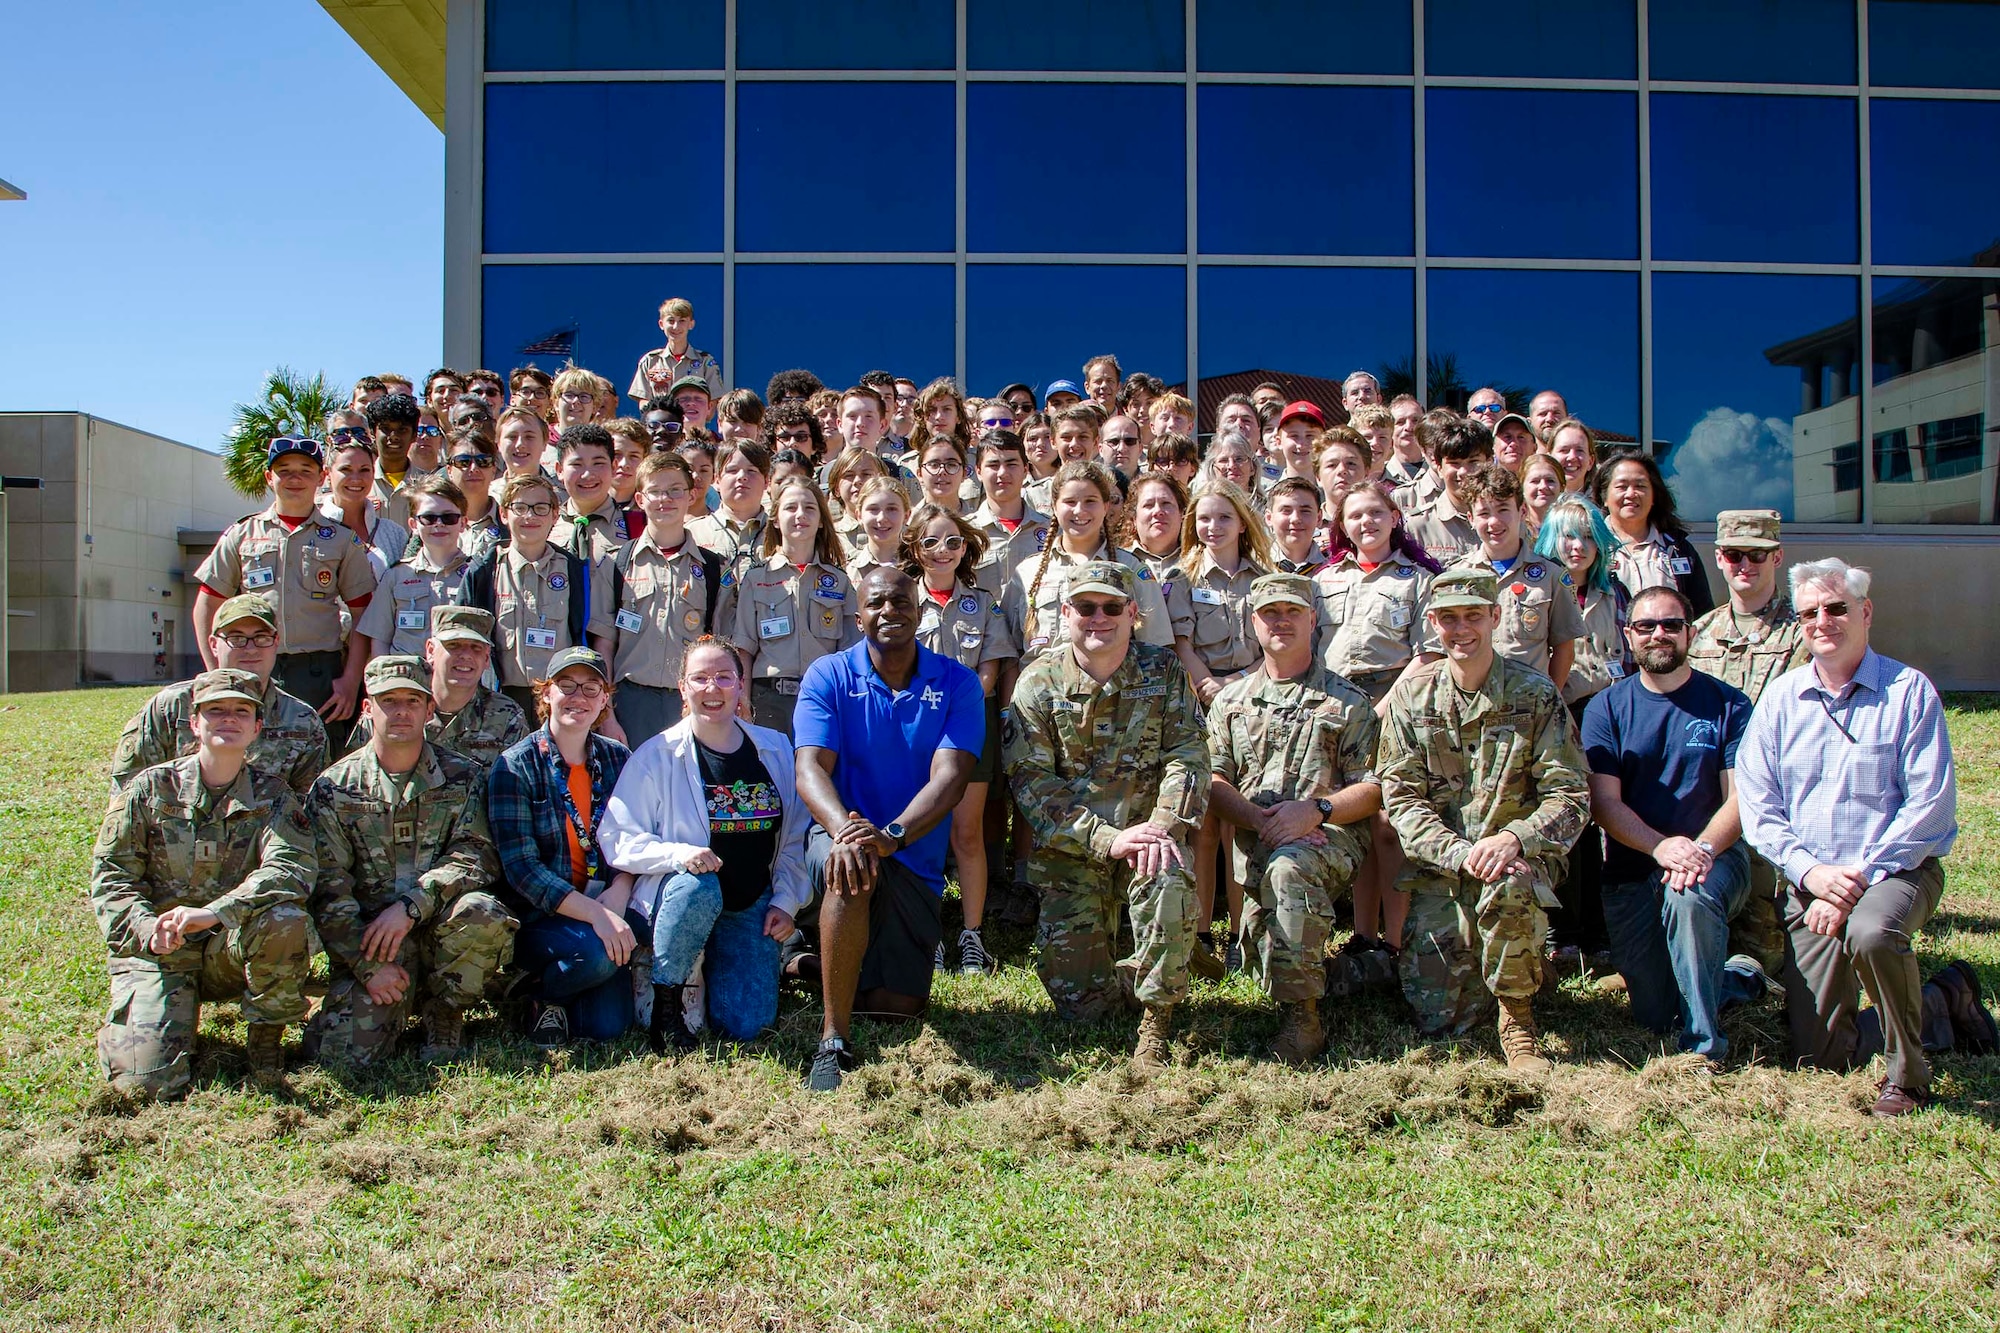 A group of 62 Boy Scouts and their Troop Leaders from across Central Florida pose with members of the Air Force Technical Applications Center Oct. 22, 2022, after earning the coveted Nuclear Science Merit Badge.  AFTAC, the sole nuclear treaty monitoring center in the Department of Defense, hosts the merit badge event each year to help the boys and girls learn more about nuclear science. (U.S. Air Force photo by Susan A. Romano)